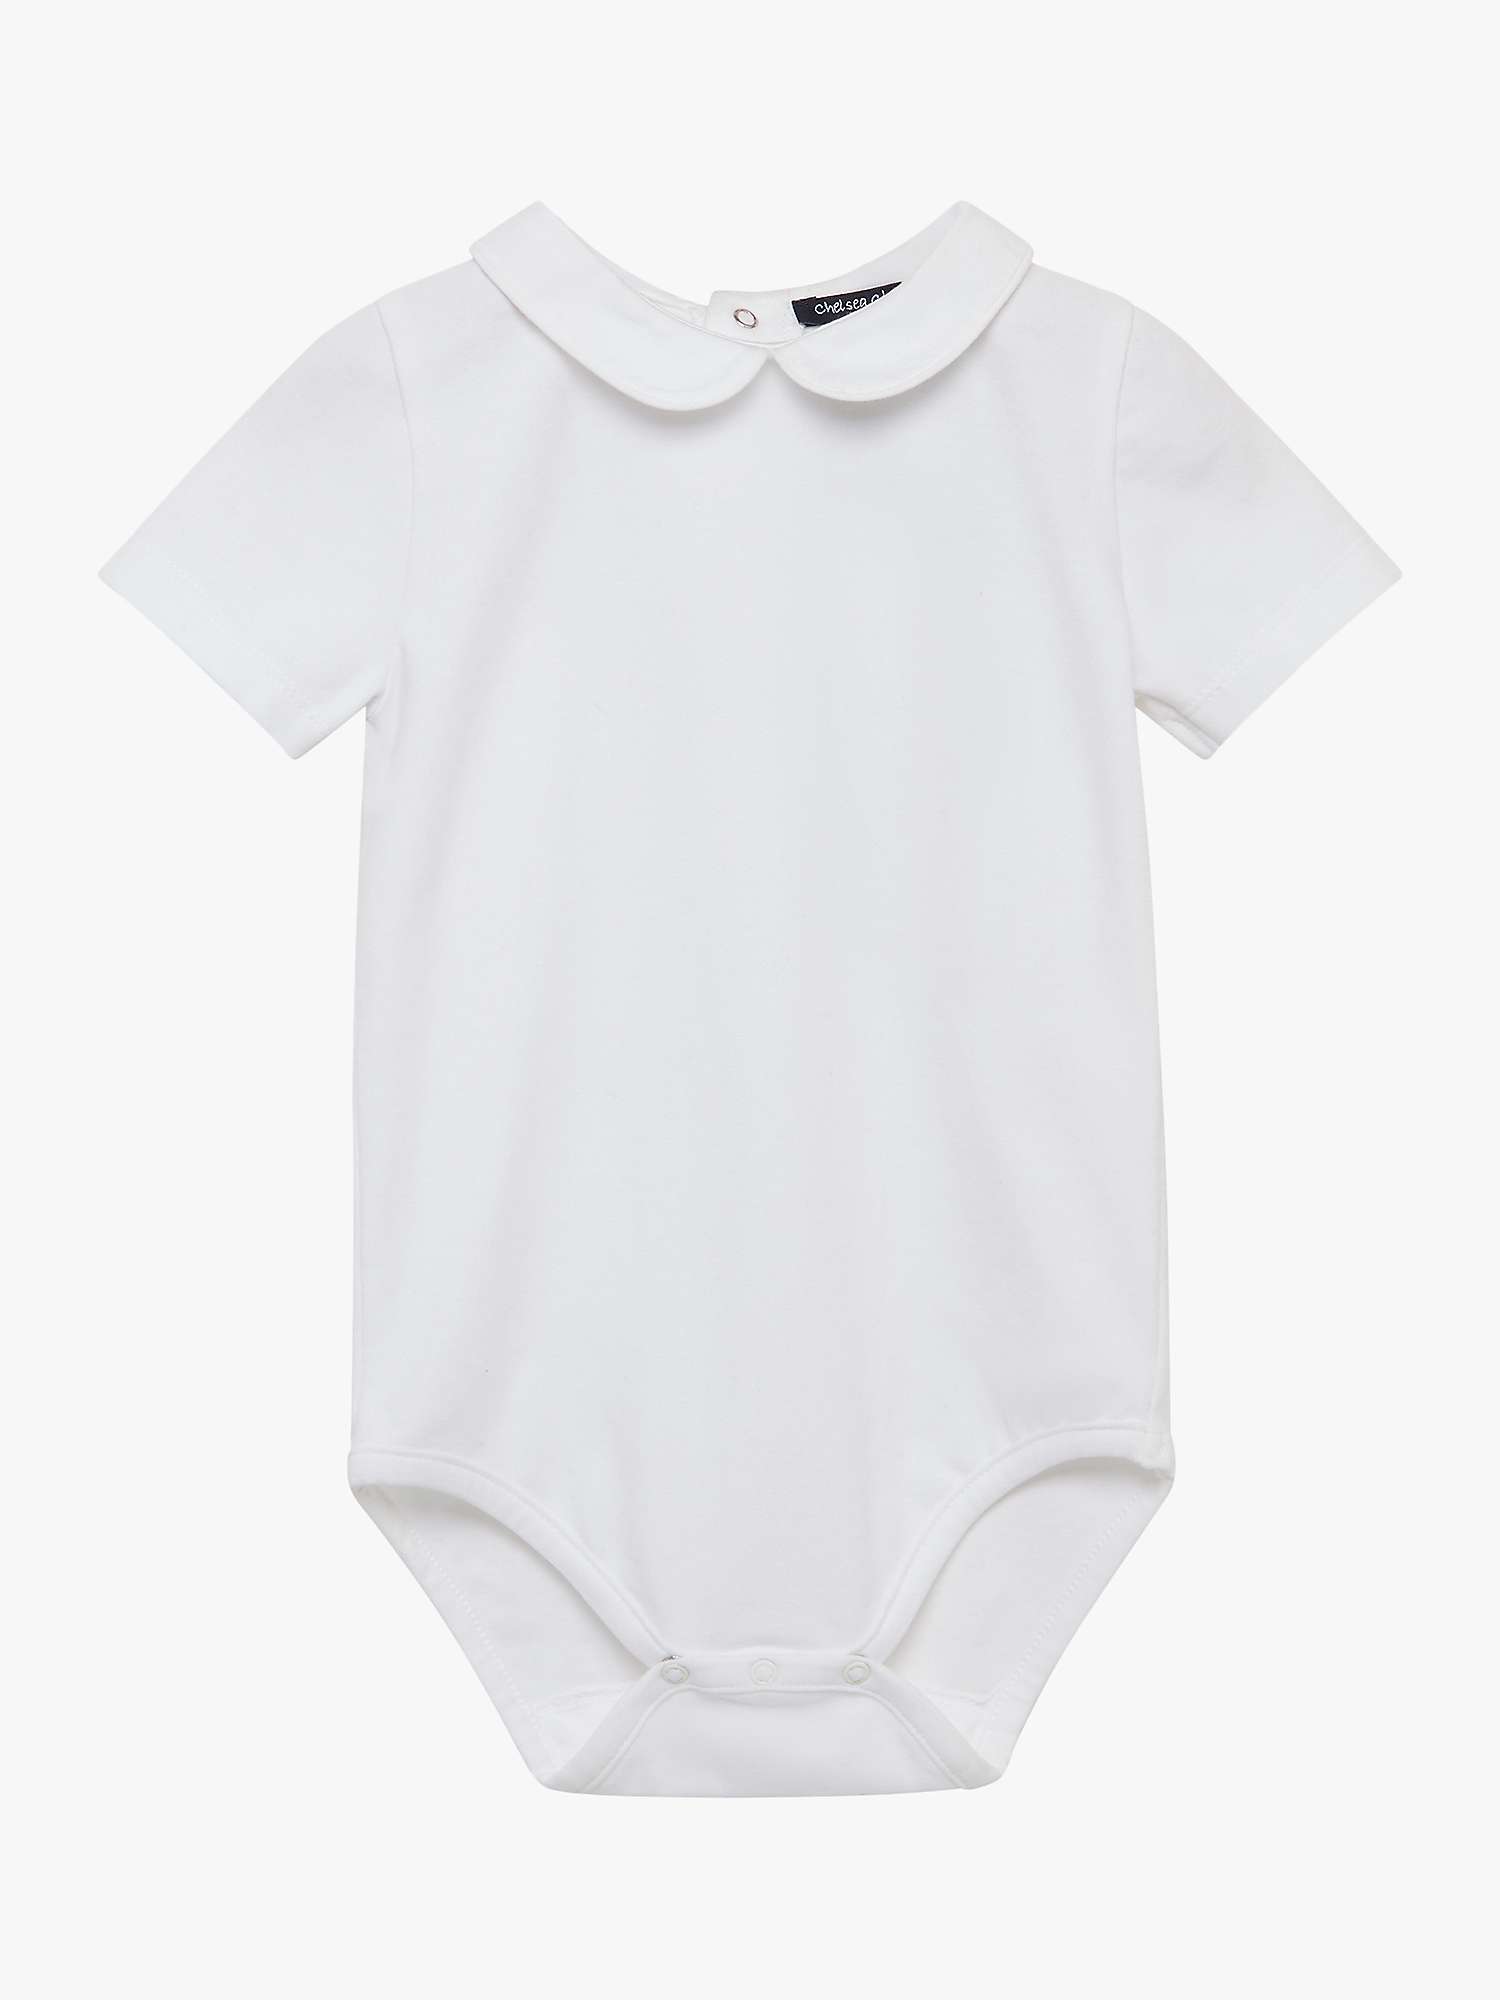 Buy Trotters Thomas Brown Baby Milo Short Sleeve Jersey Bodysuit, White Online at johnlewis.com